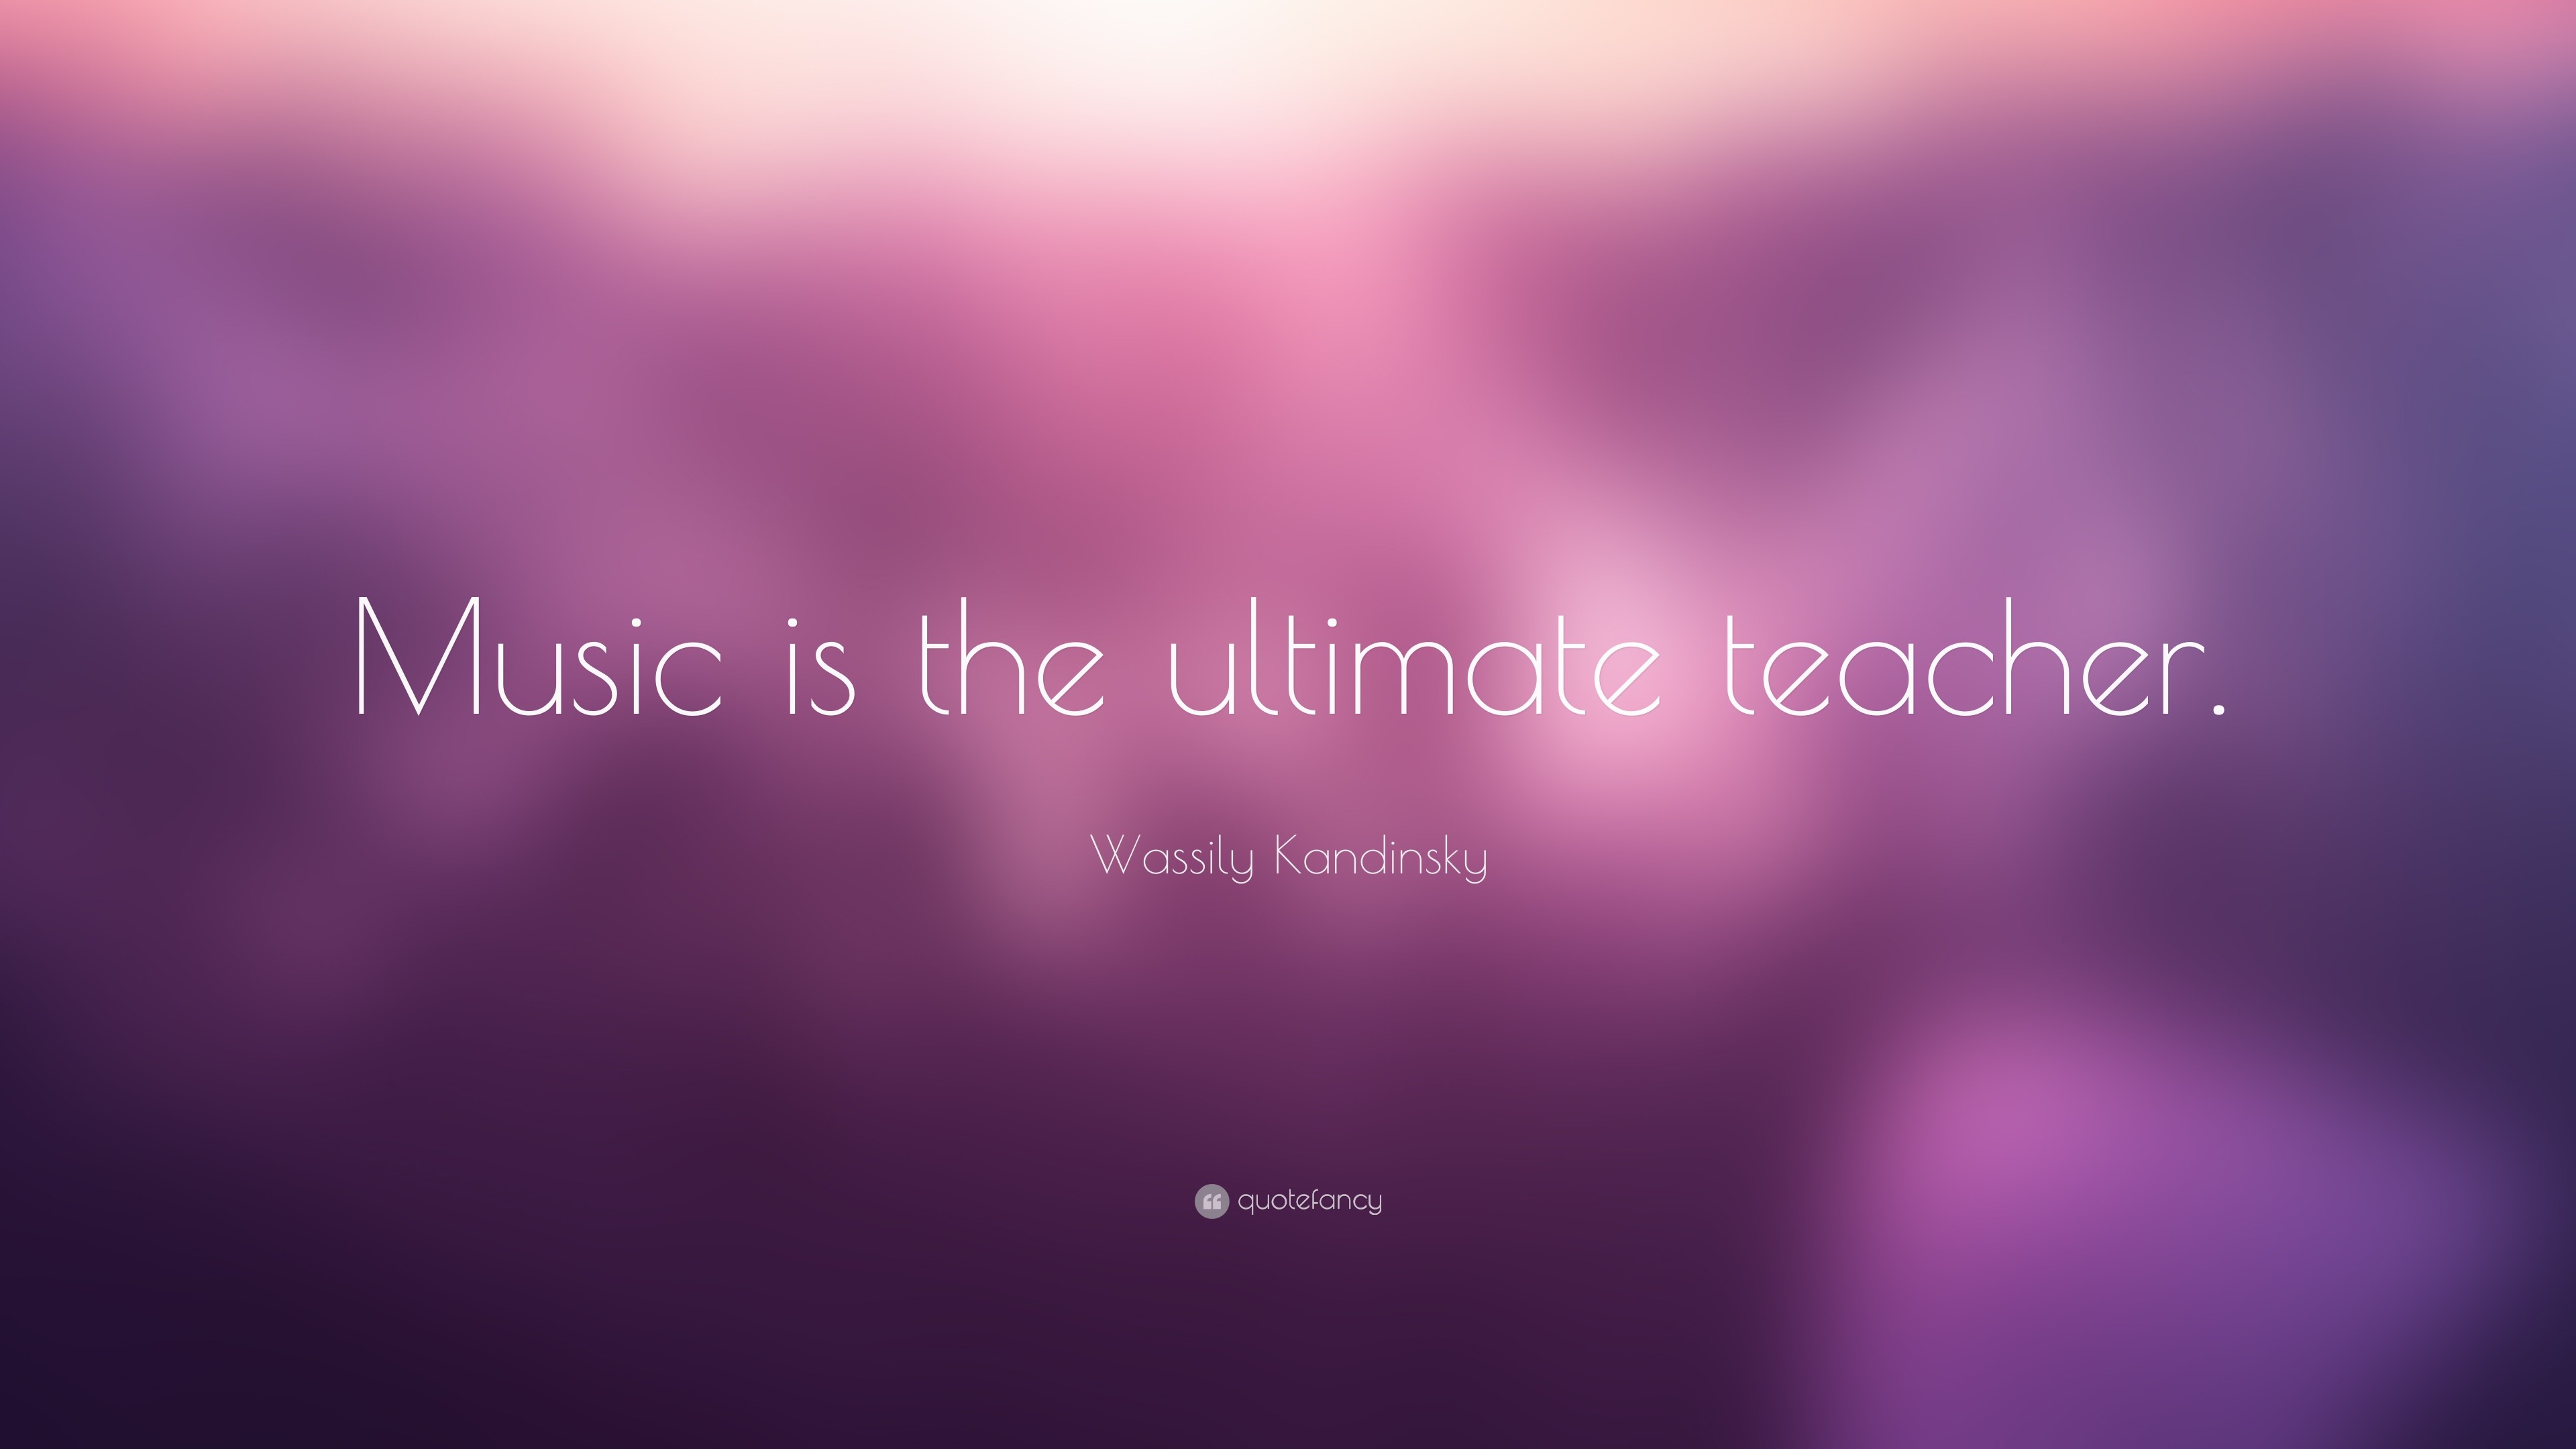 3840x2160 Wassily Kandinsky Quote: “Music is the ultimate teacher.”